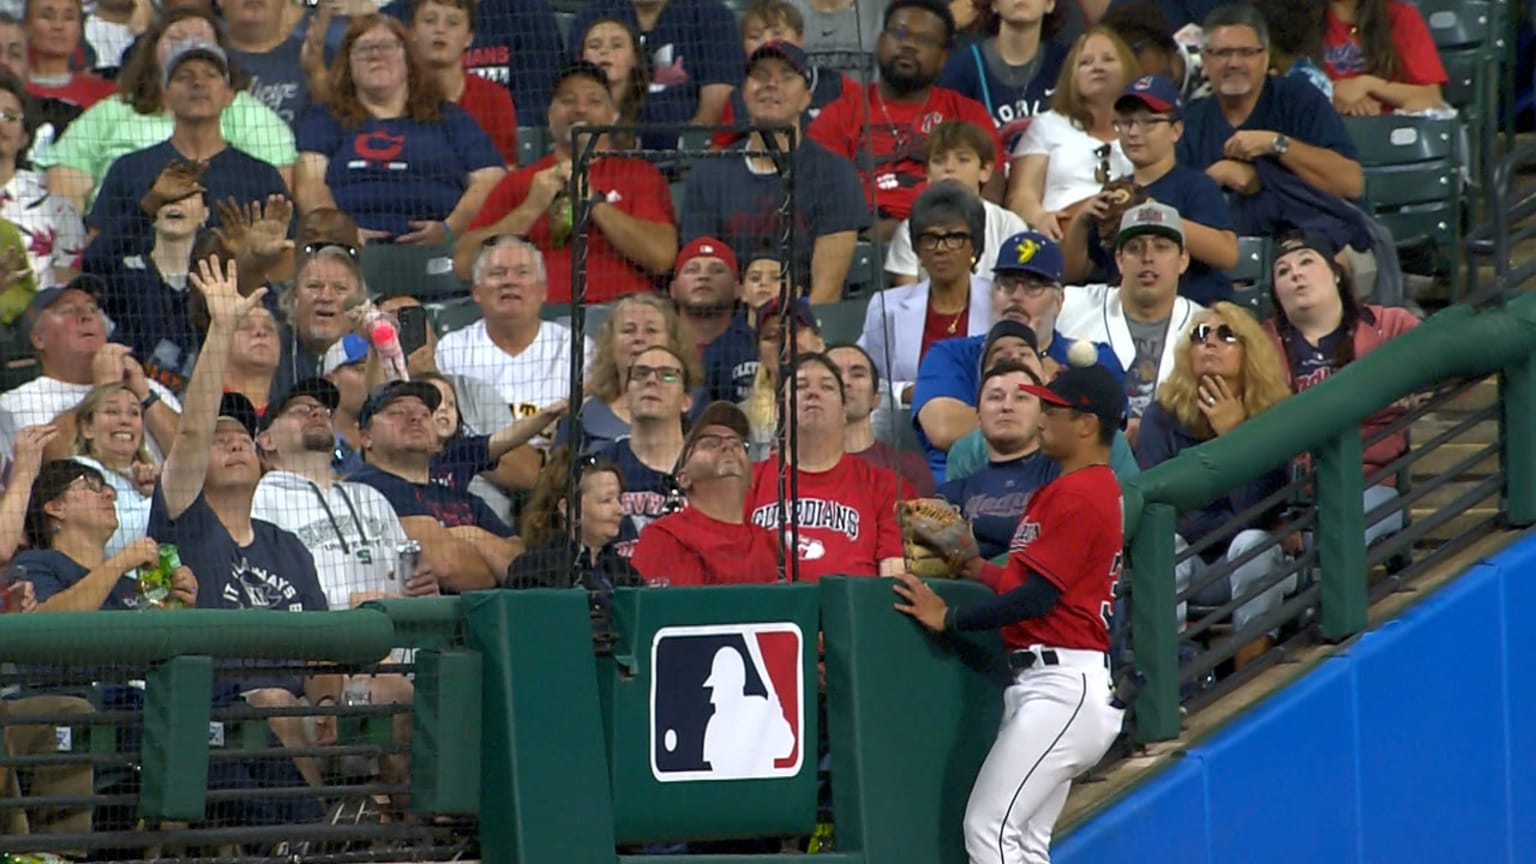 A player in a red jersey stands next to the crowd in foul territory as a baseball bounces off his head